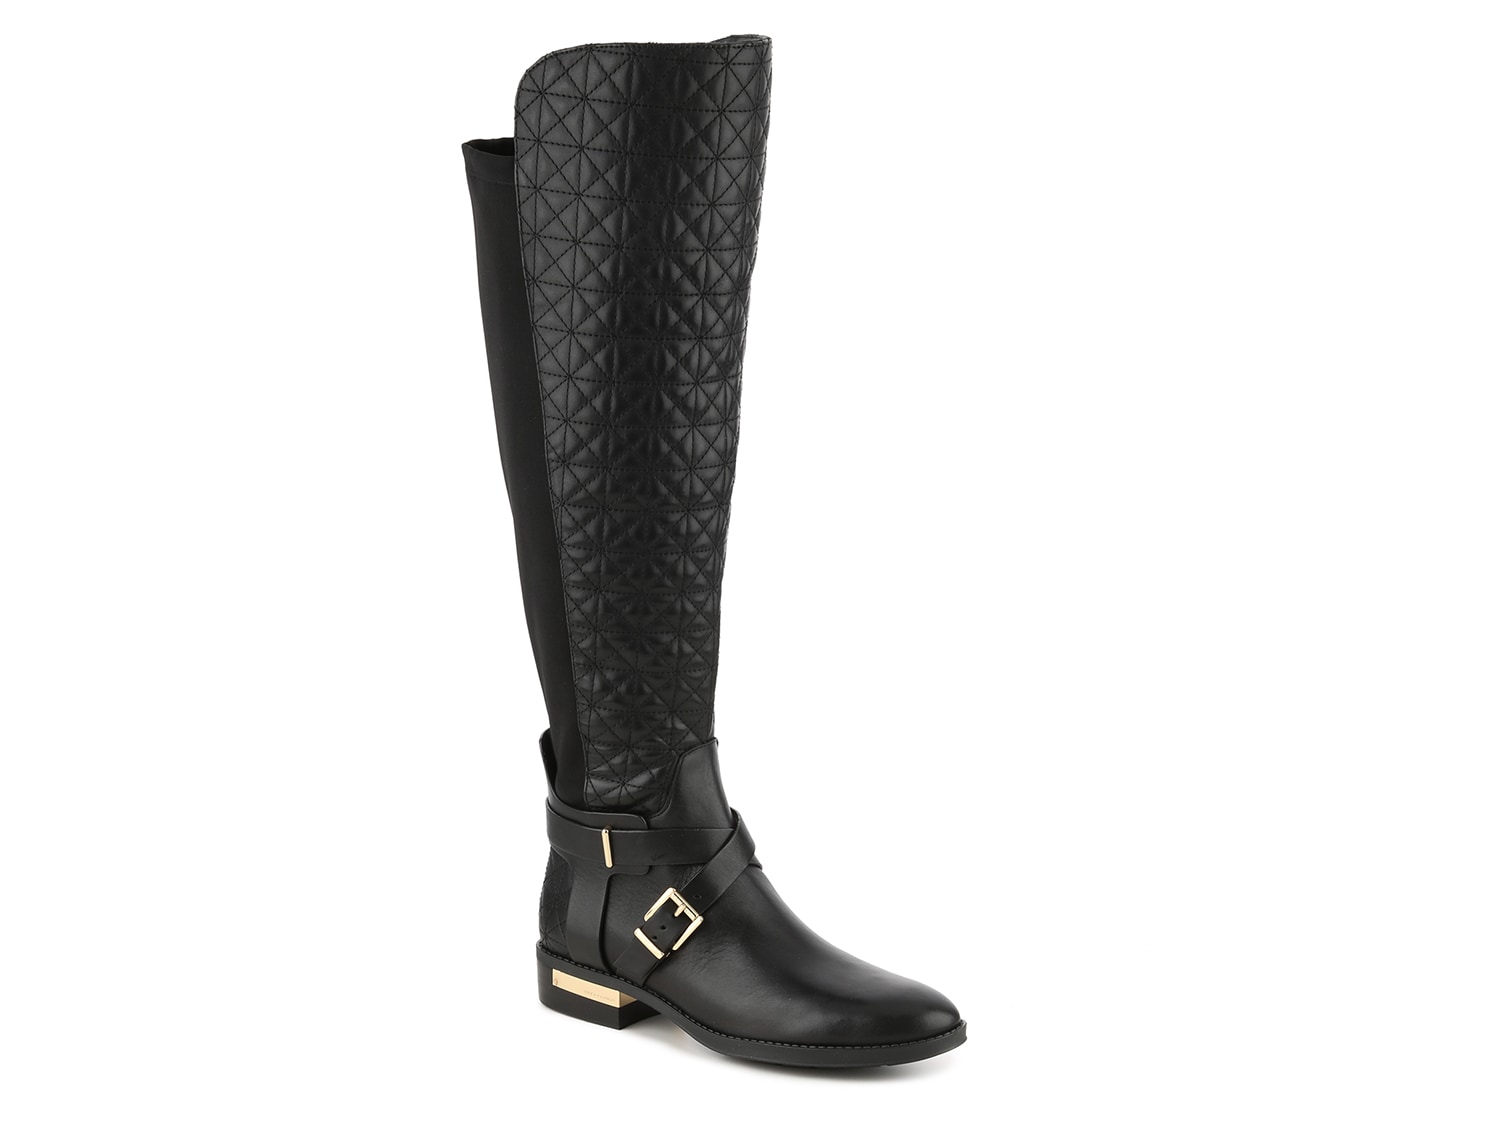 Vince Camuto Patira Over The Knee Riding Boot | DSW